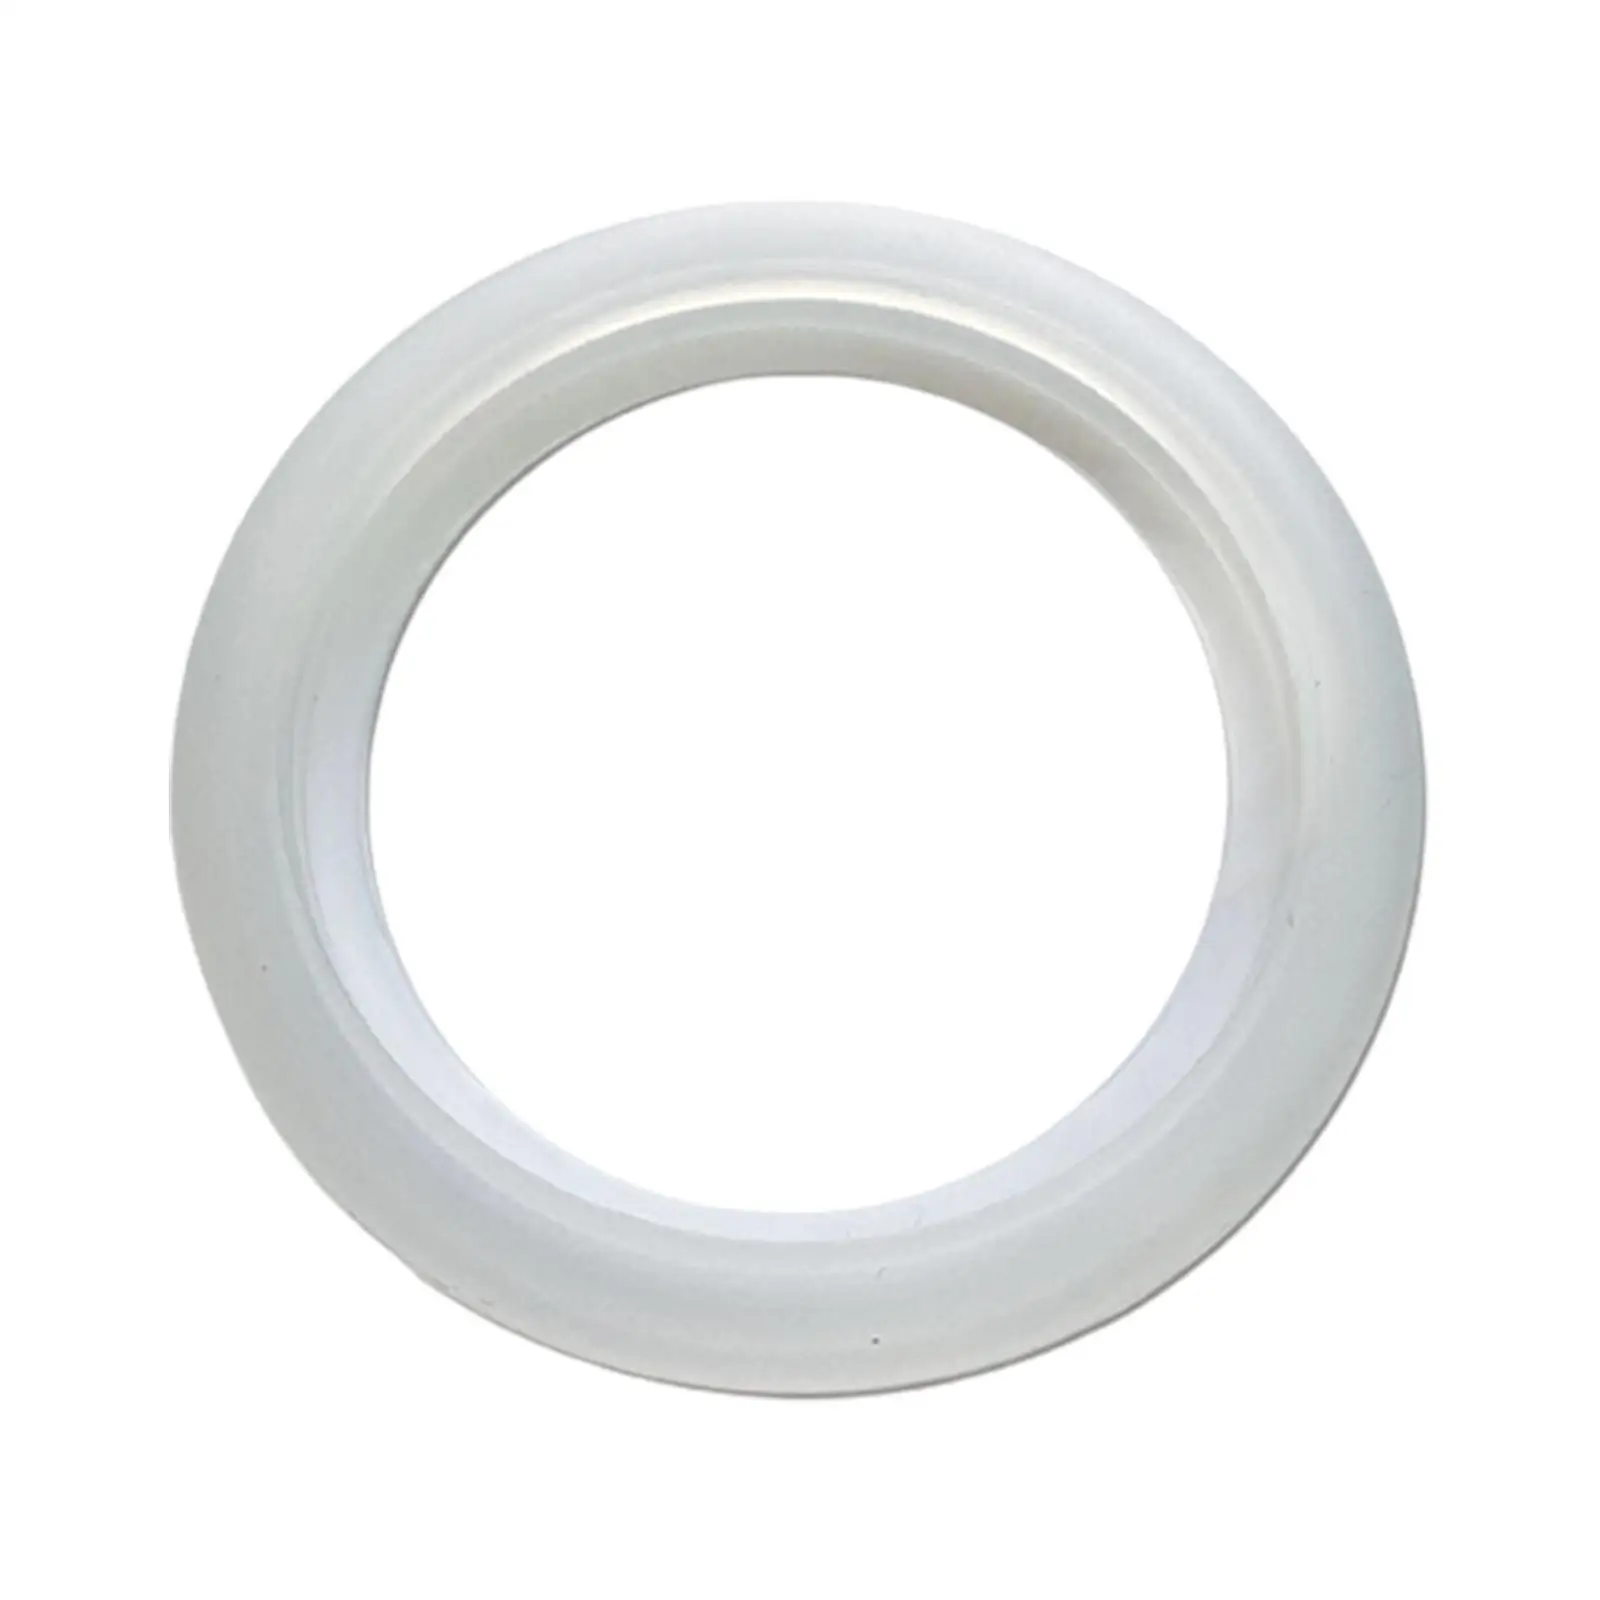 Silicone Steam Rings Easy to Clean Replacement Coffee Machine Rings Silicone Group Gasket for Bes230 800ES Coffee Maker Machine